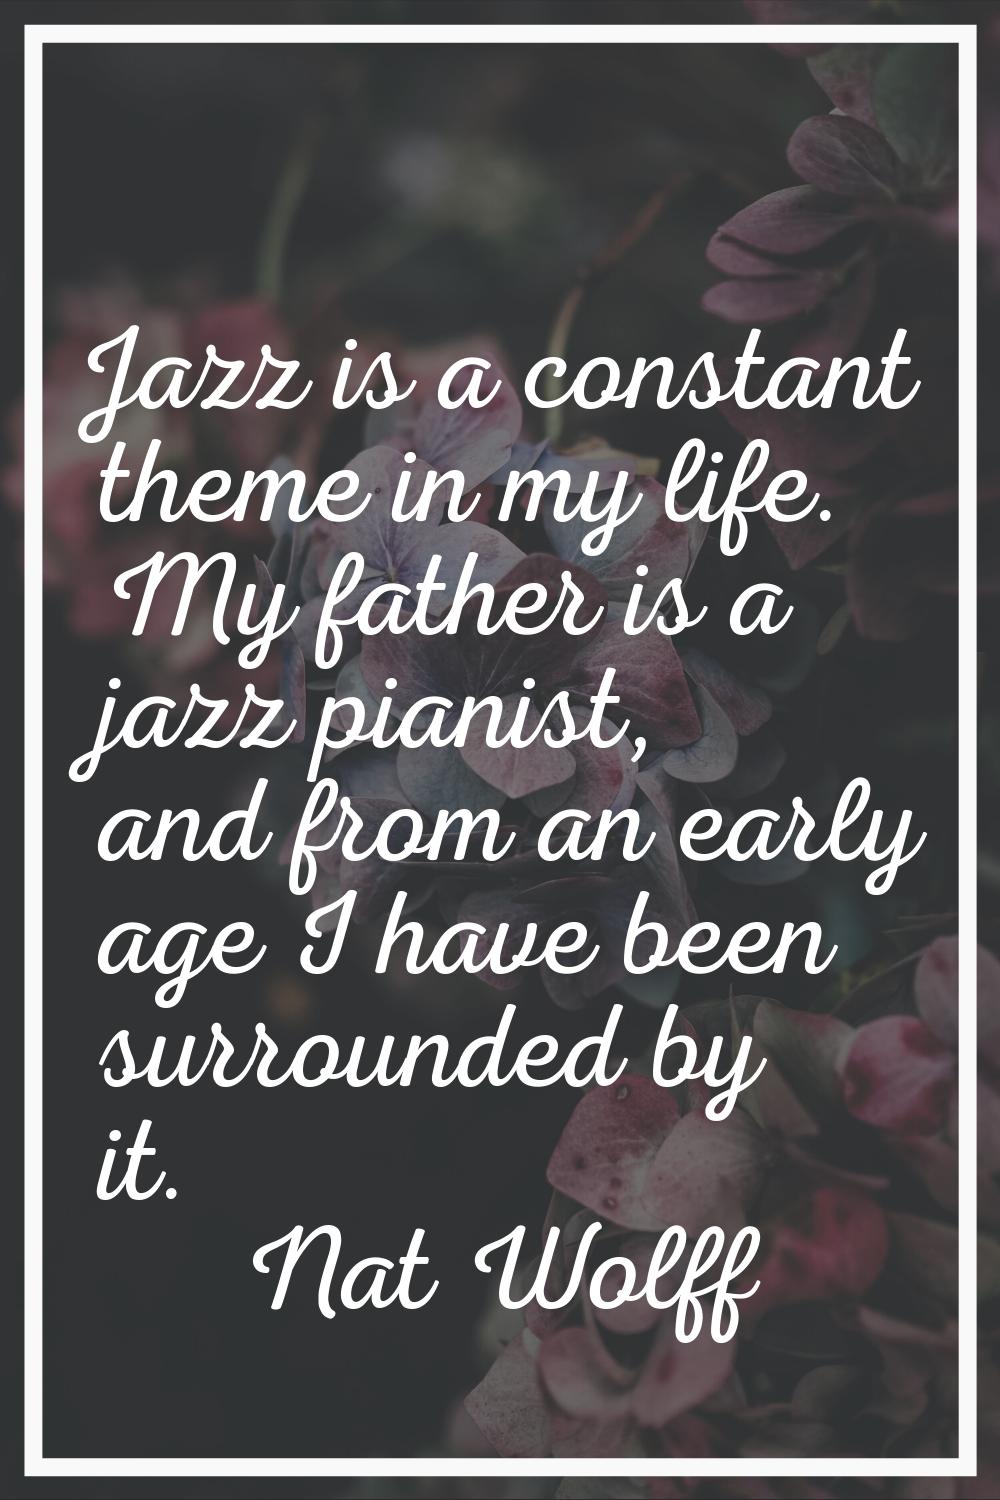 Jazz is a constant theme in my life. My father is a jazz pianist, and from an early age I have been